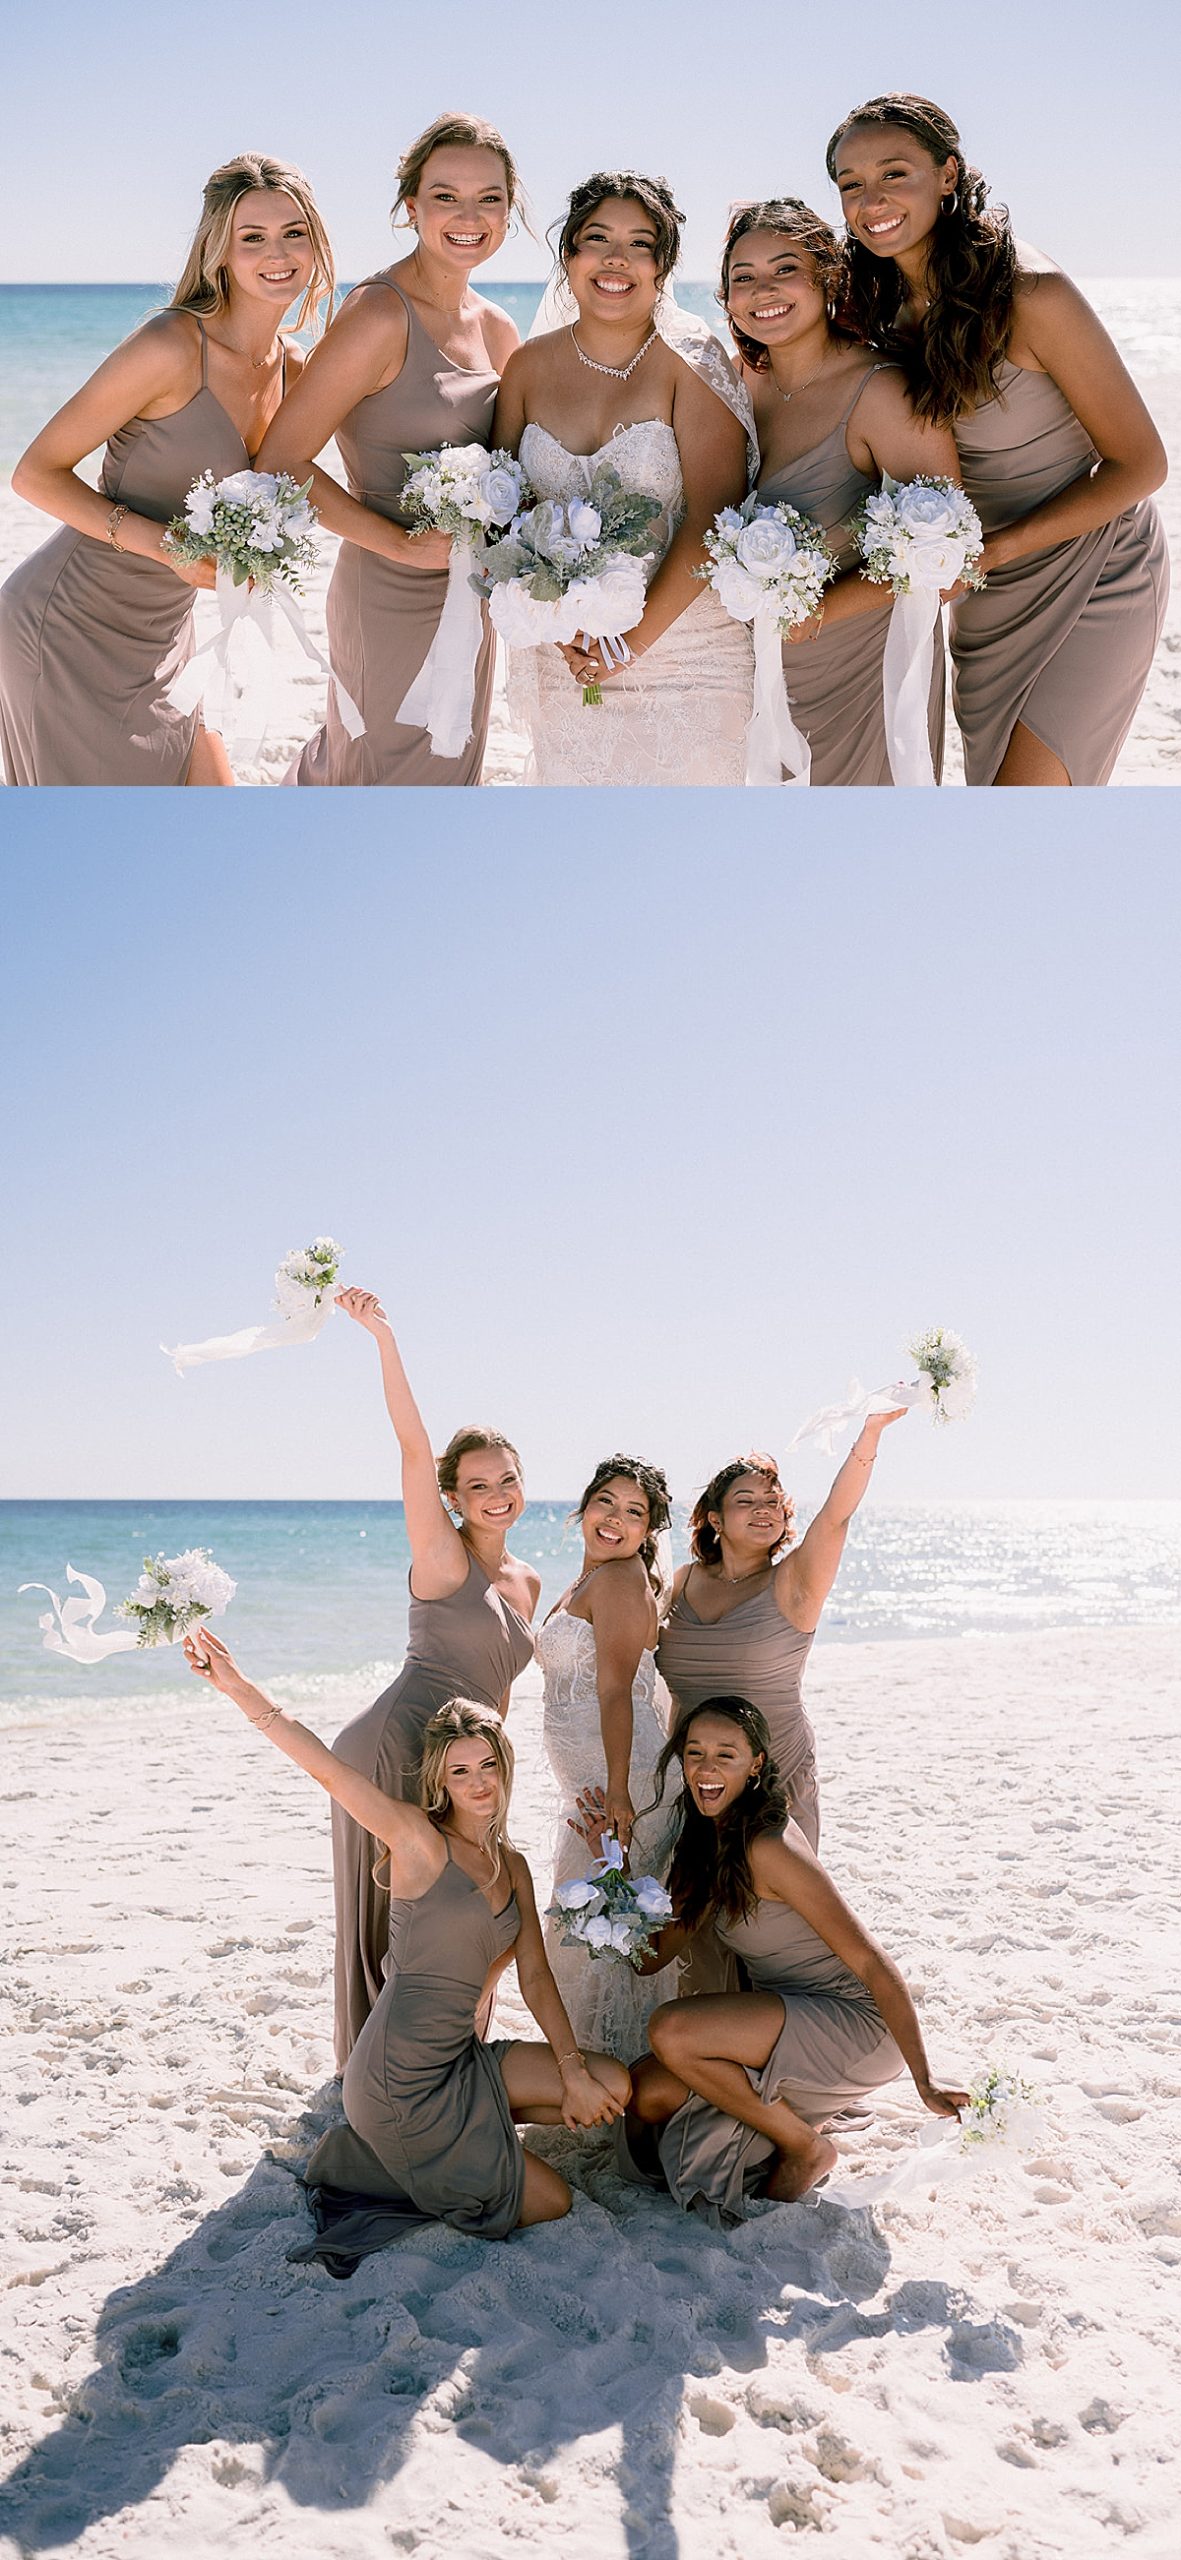 bride and bridesmaids wearing tan colored dresses and holding white wedding florals by Emily burns photo 